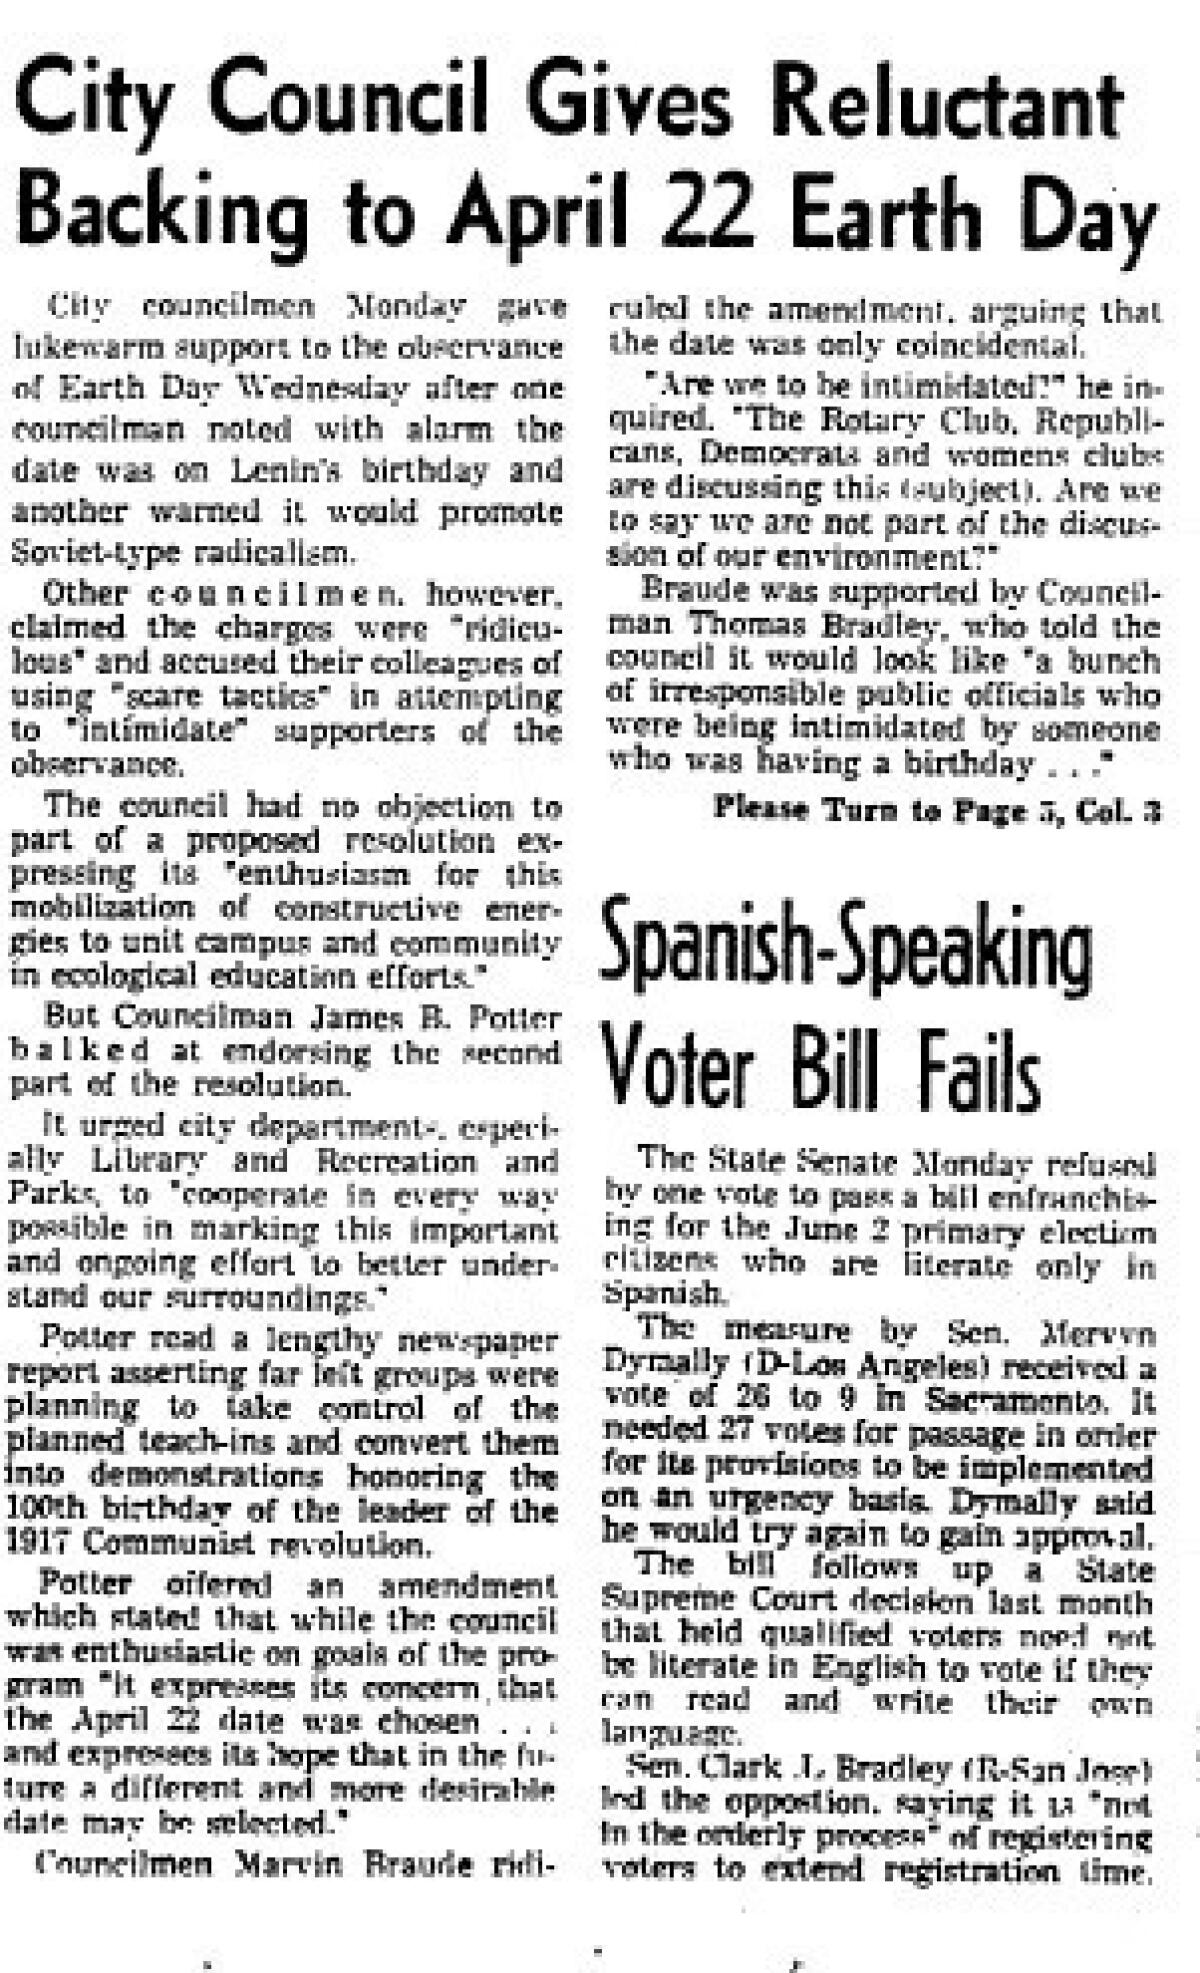 A story in the April 21, 1970 Los Angeles Times discusses a City Council debate about a resolution to support Earth Day.